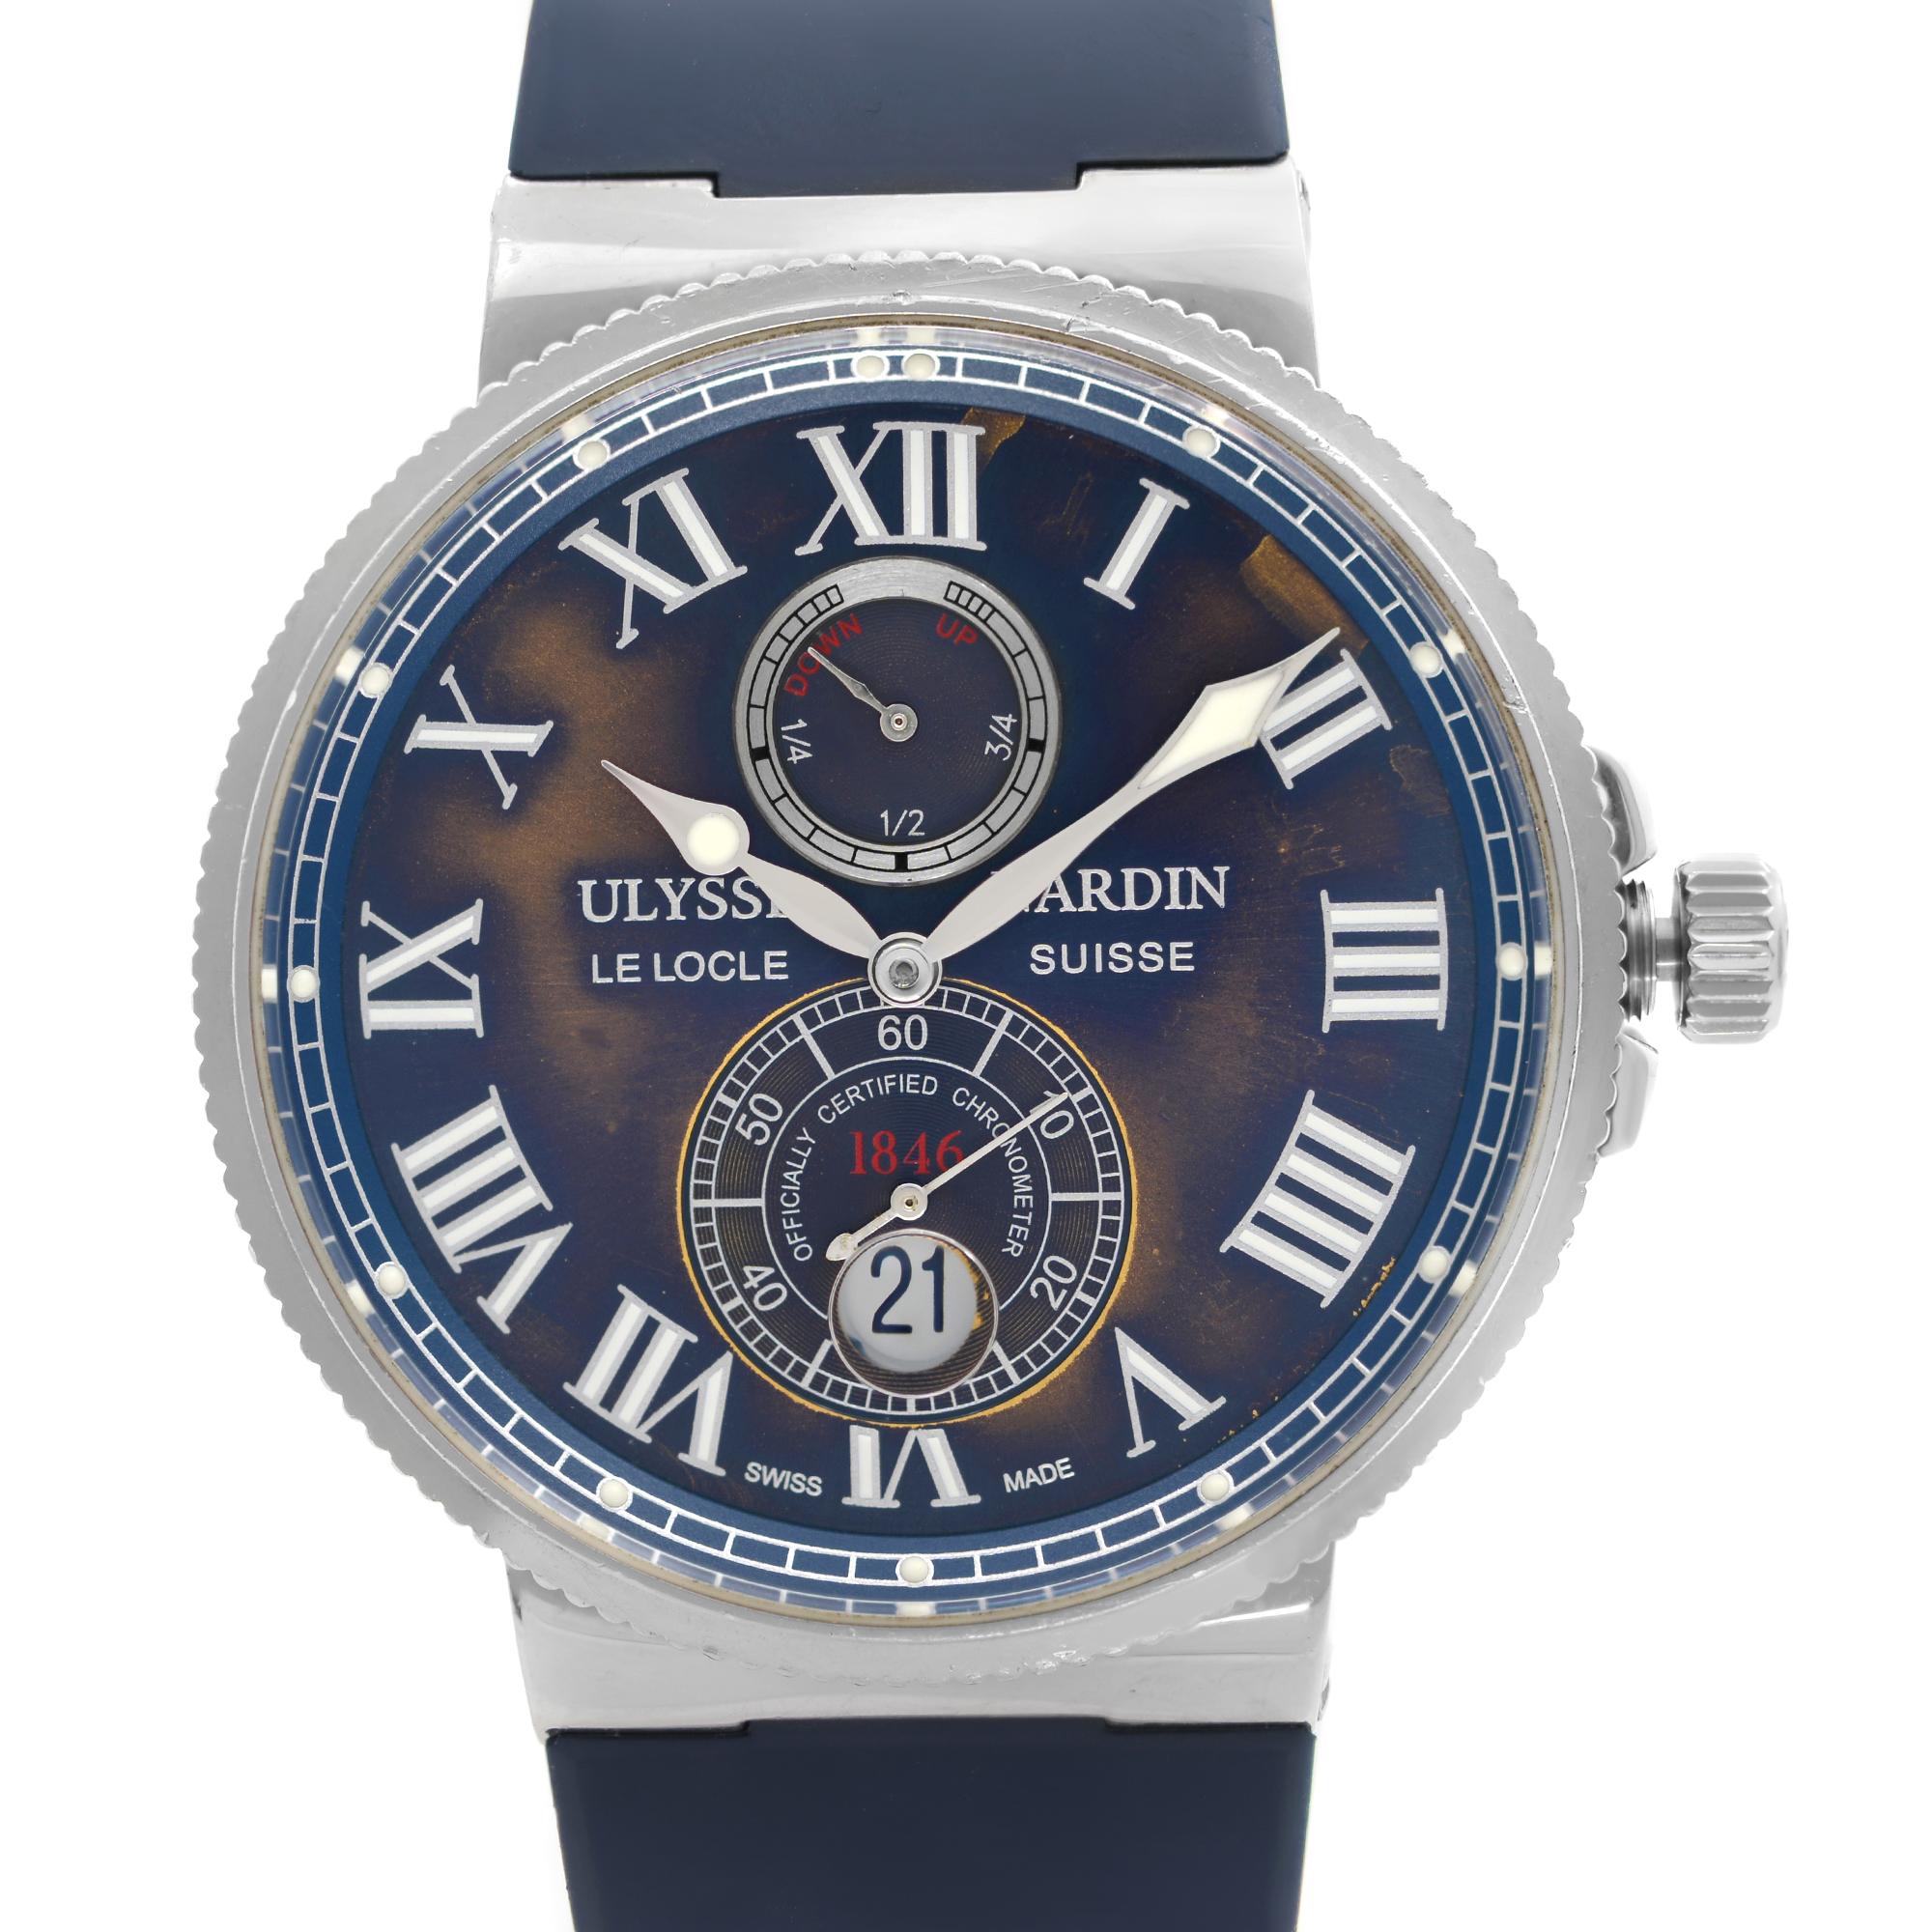 Pre-Owned Ulysse Nardin Maxi Marine Stainless Steel Blue Dial Automatic Men's Watch 263-67-3/43. The Timepiece is powered by an Automatic Movement. This Beautiful Timepiece Features: Polished Steel Case and Two-Piece Blue Rubber with Titanium